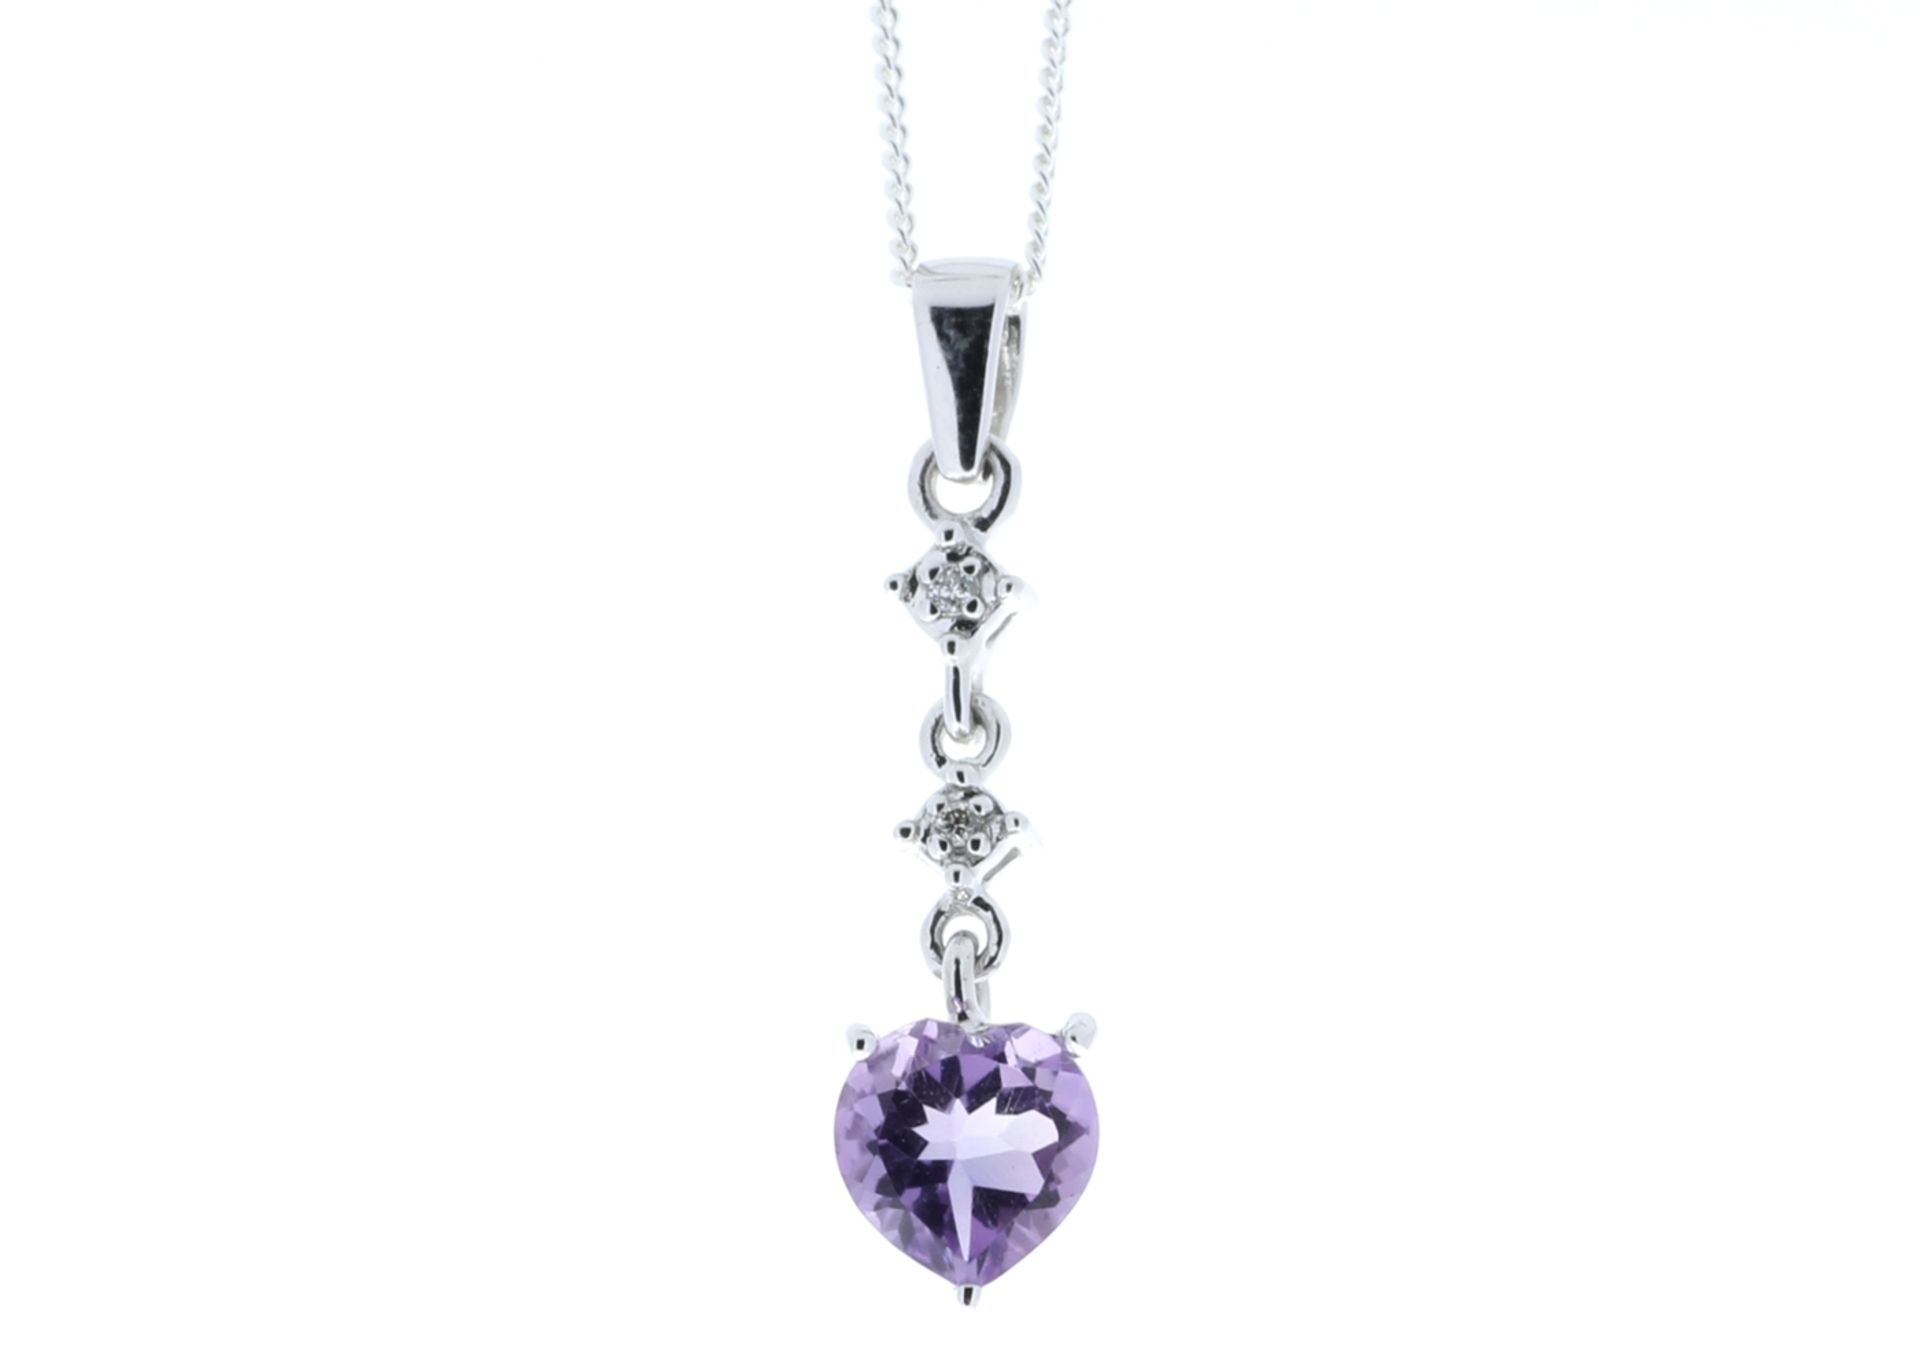 9ct White Gold Amethyst Heart Shape Diamond Pendant 0.01 Carats - Valued by GIE £420.00 - This